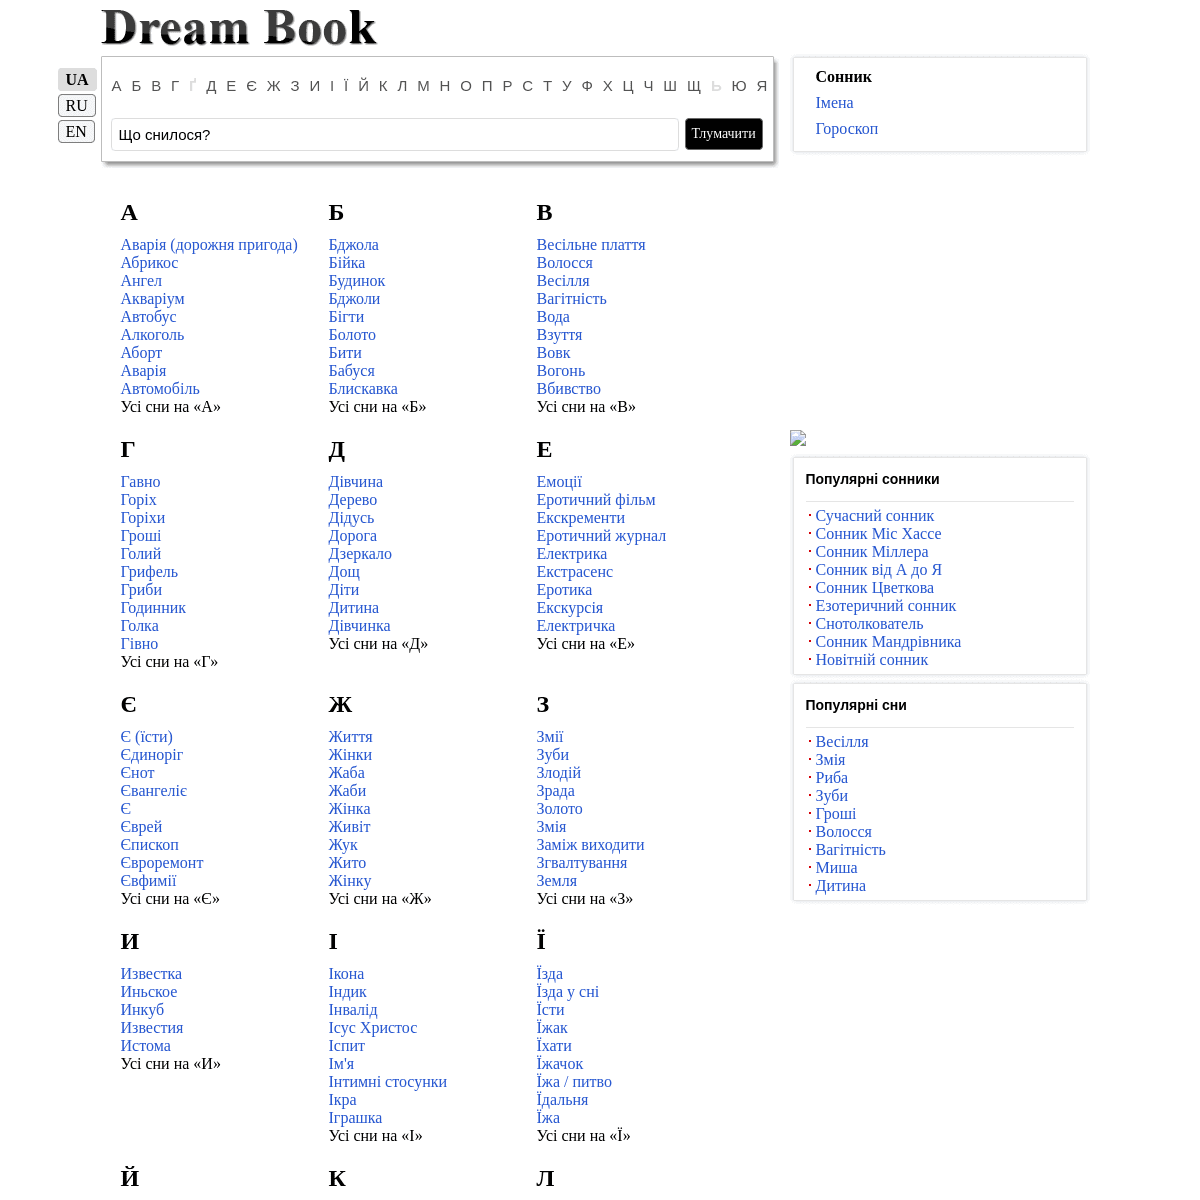 A complete backup of dreambook.in.ua